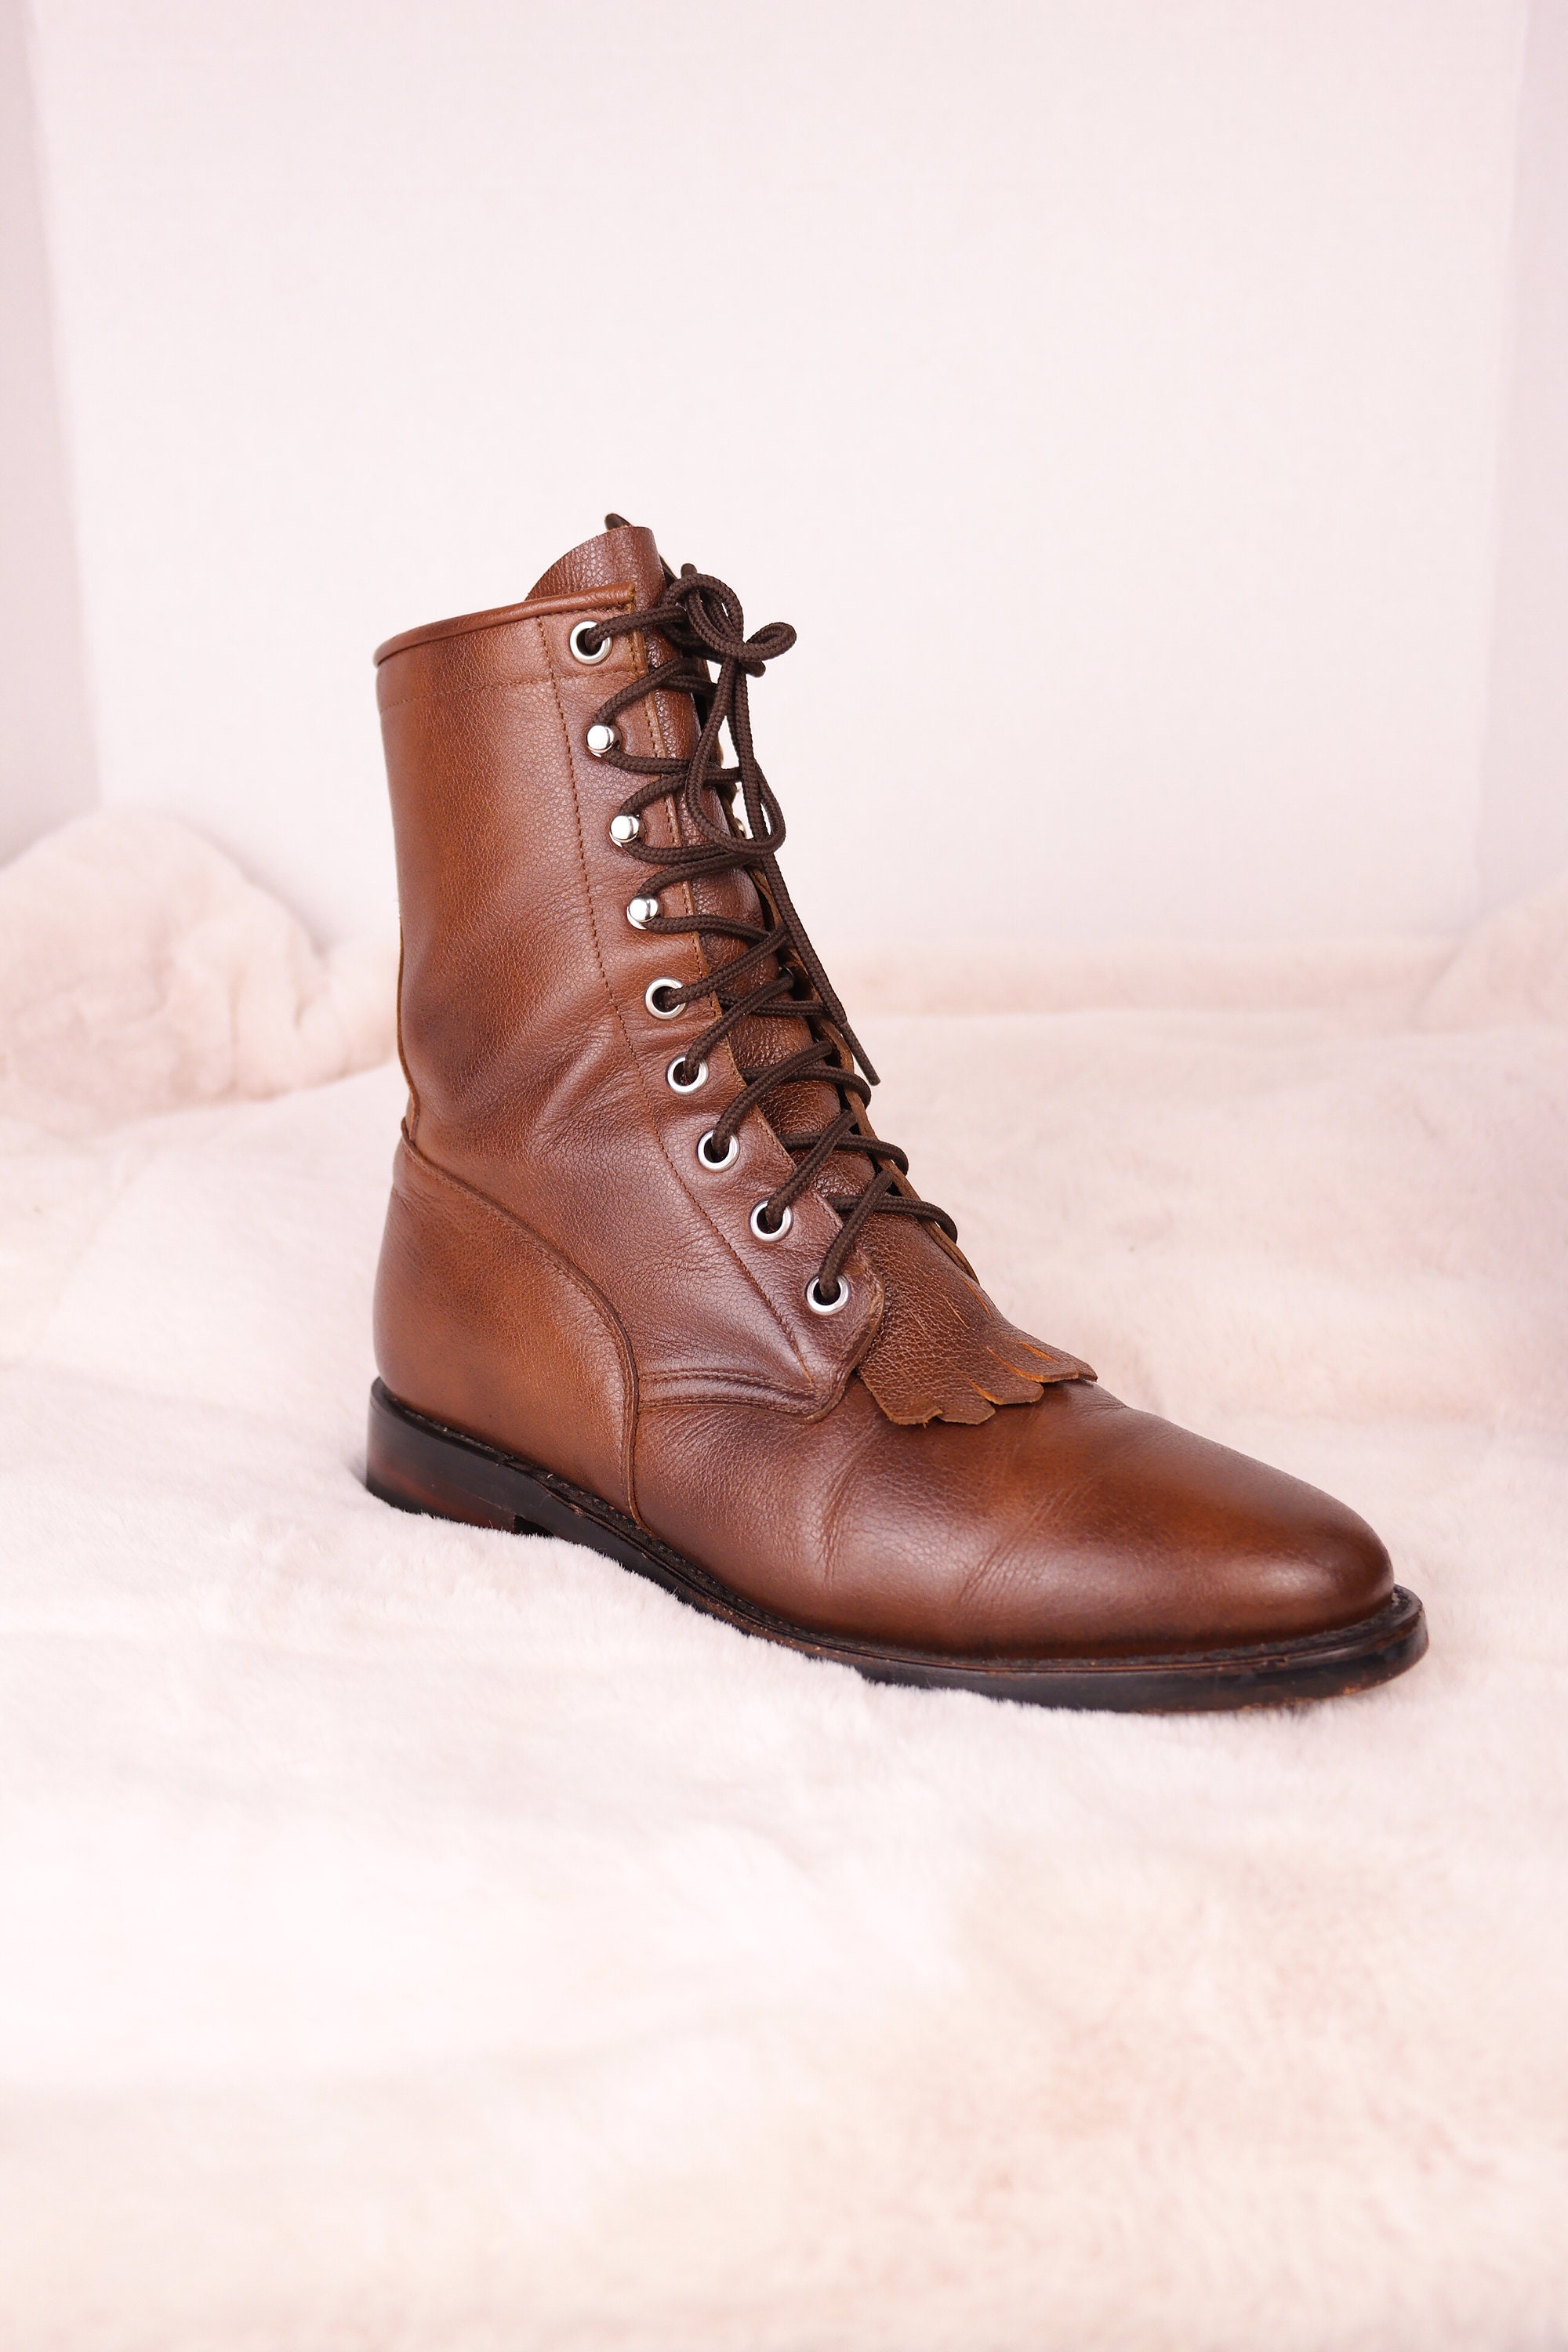 Rich brown 1940s Lace up packer work boots with original leather laces Made  in Italy Size 10 -11